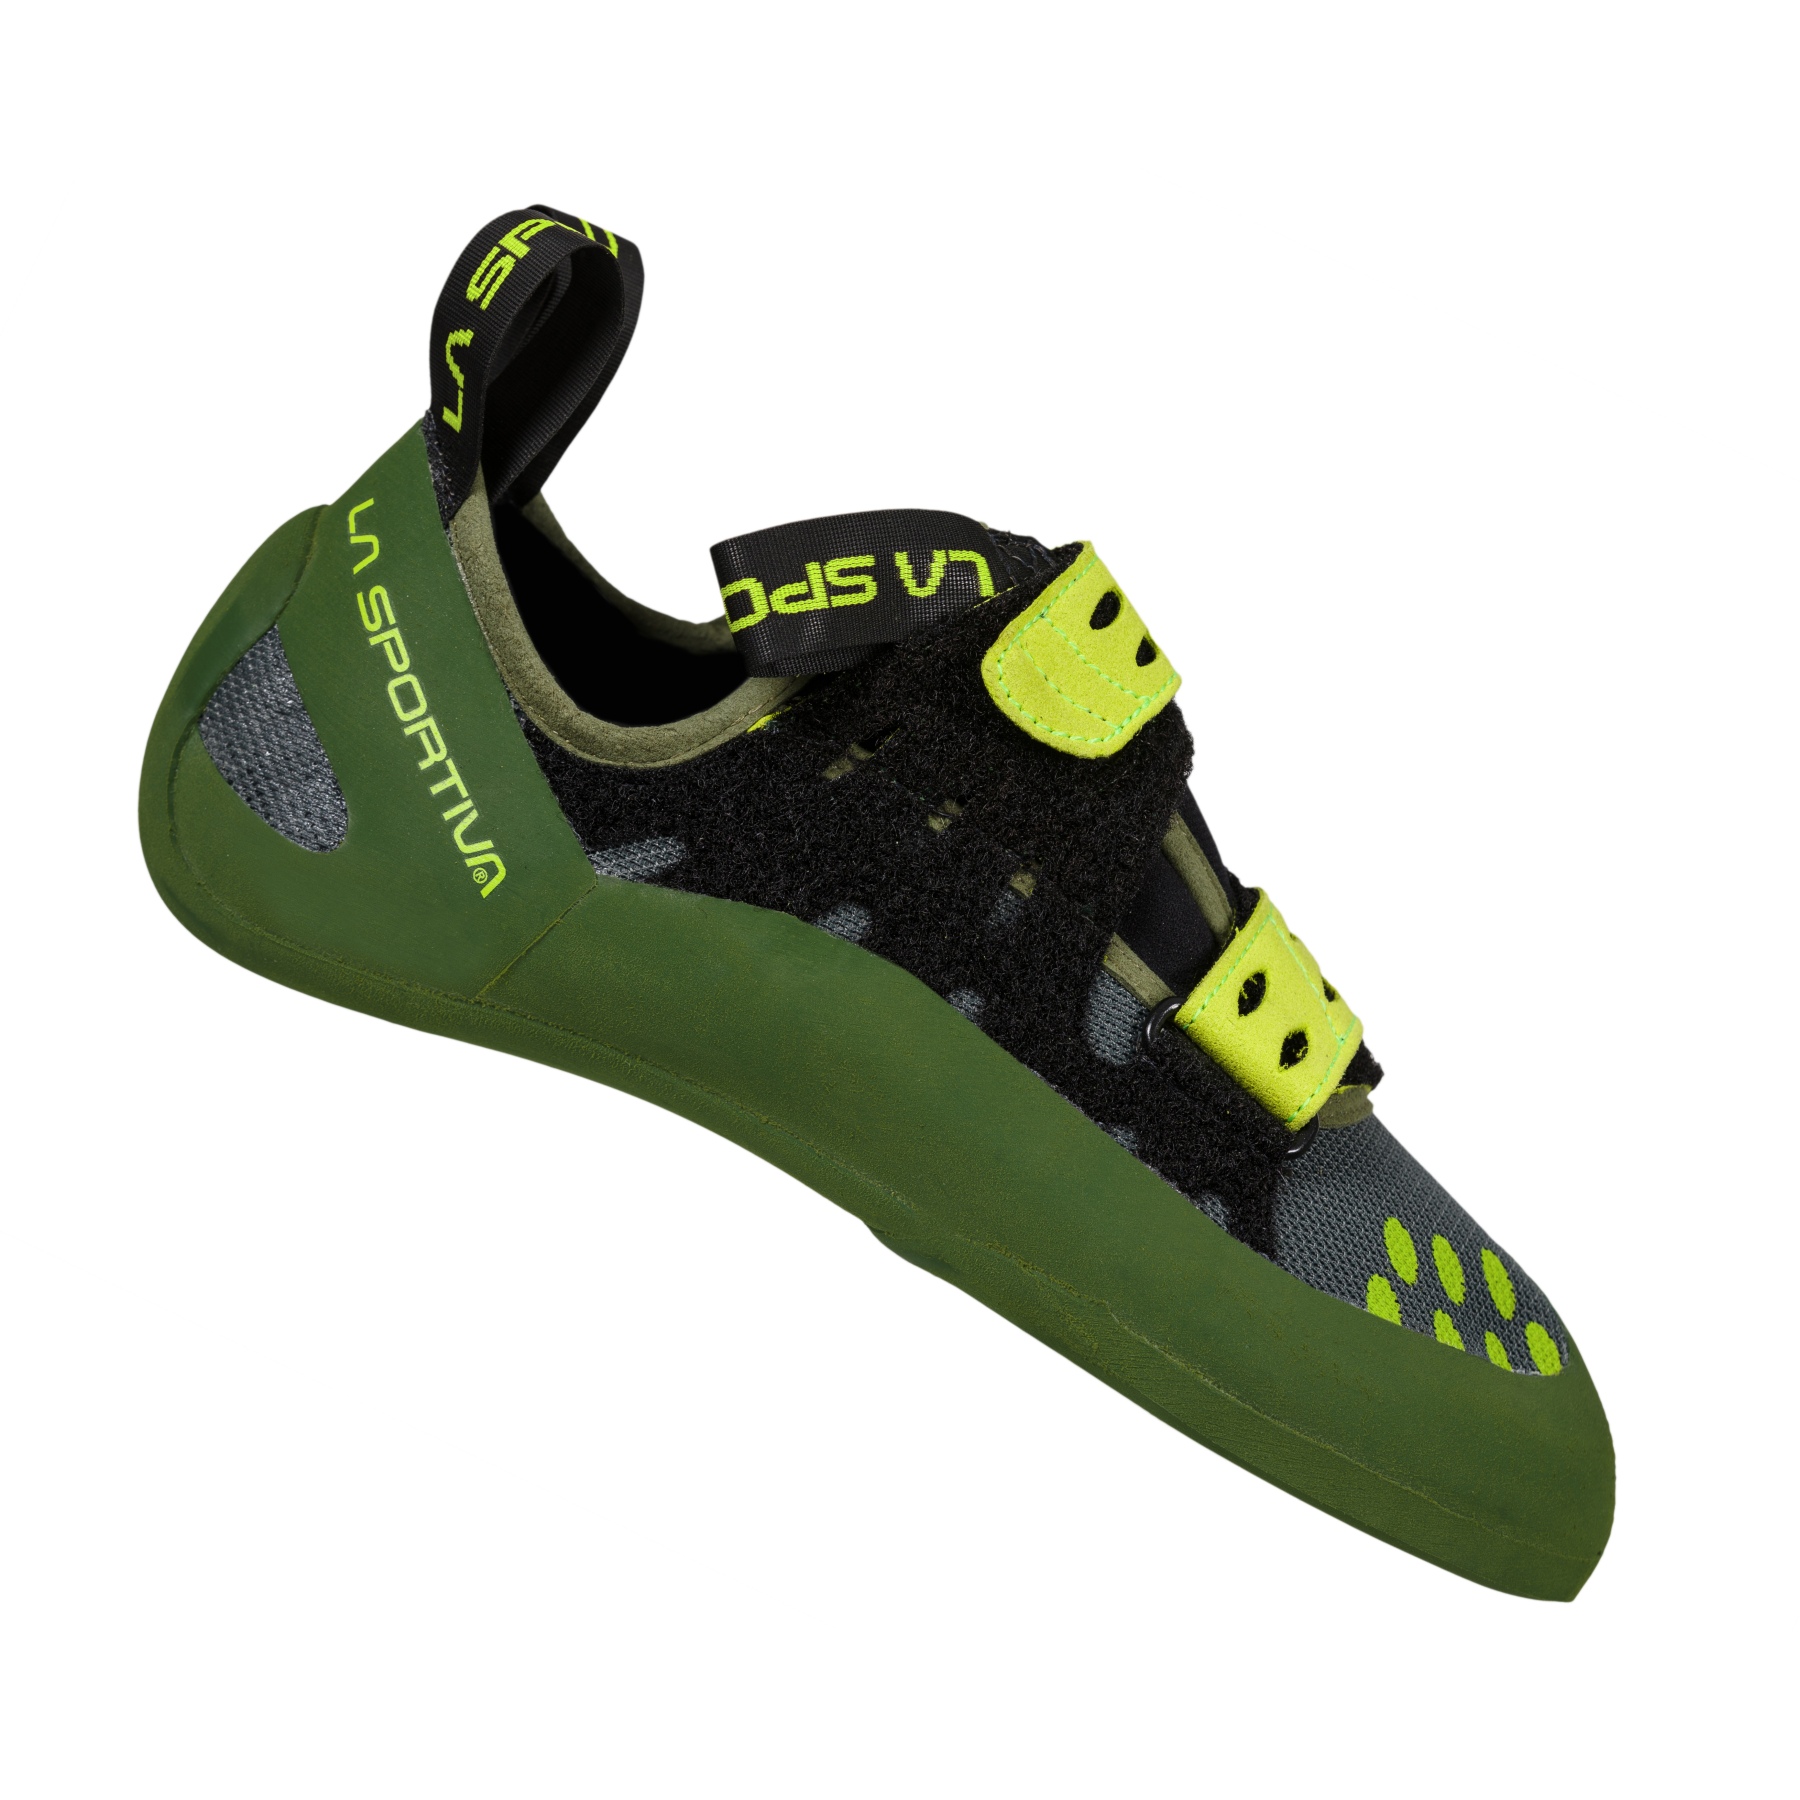 Picture of La Sportiva GeckoGym Vegan Climbing Shoes - Olive/Neon